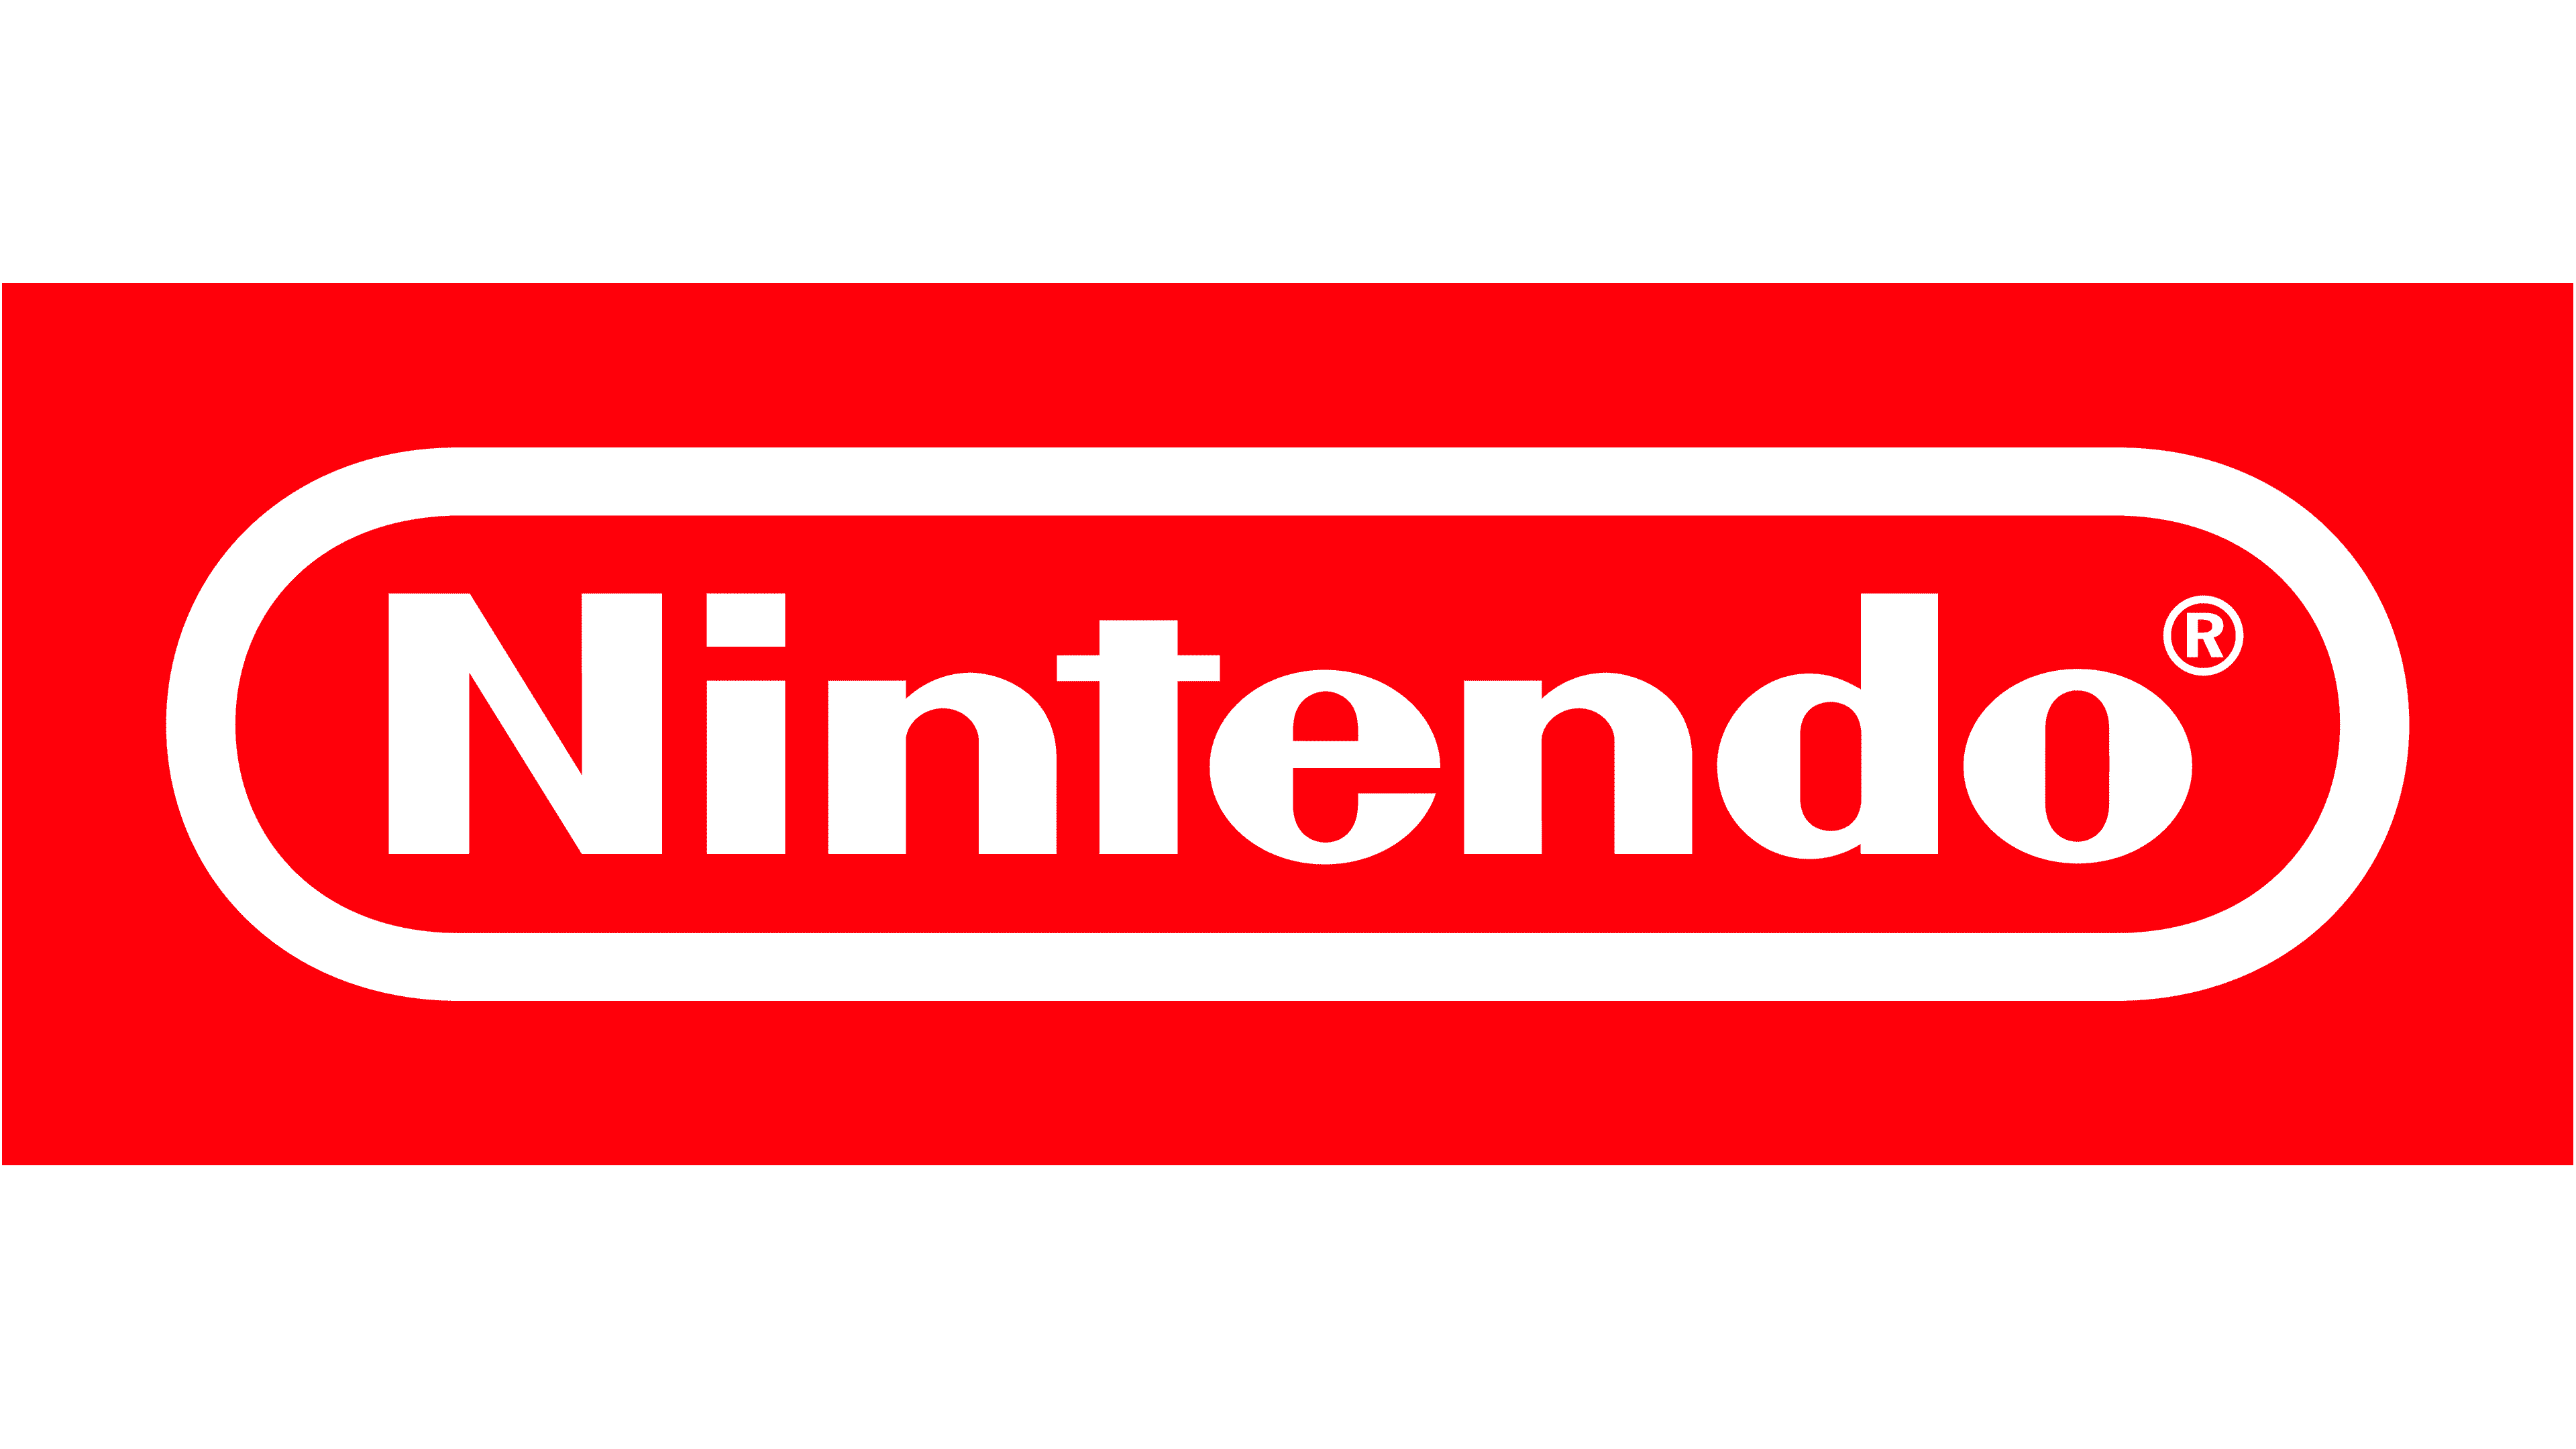 Nintendo, one of the Top Video Game Companies in the world, known for its innovative games and consoles